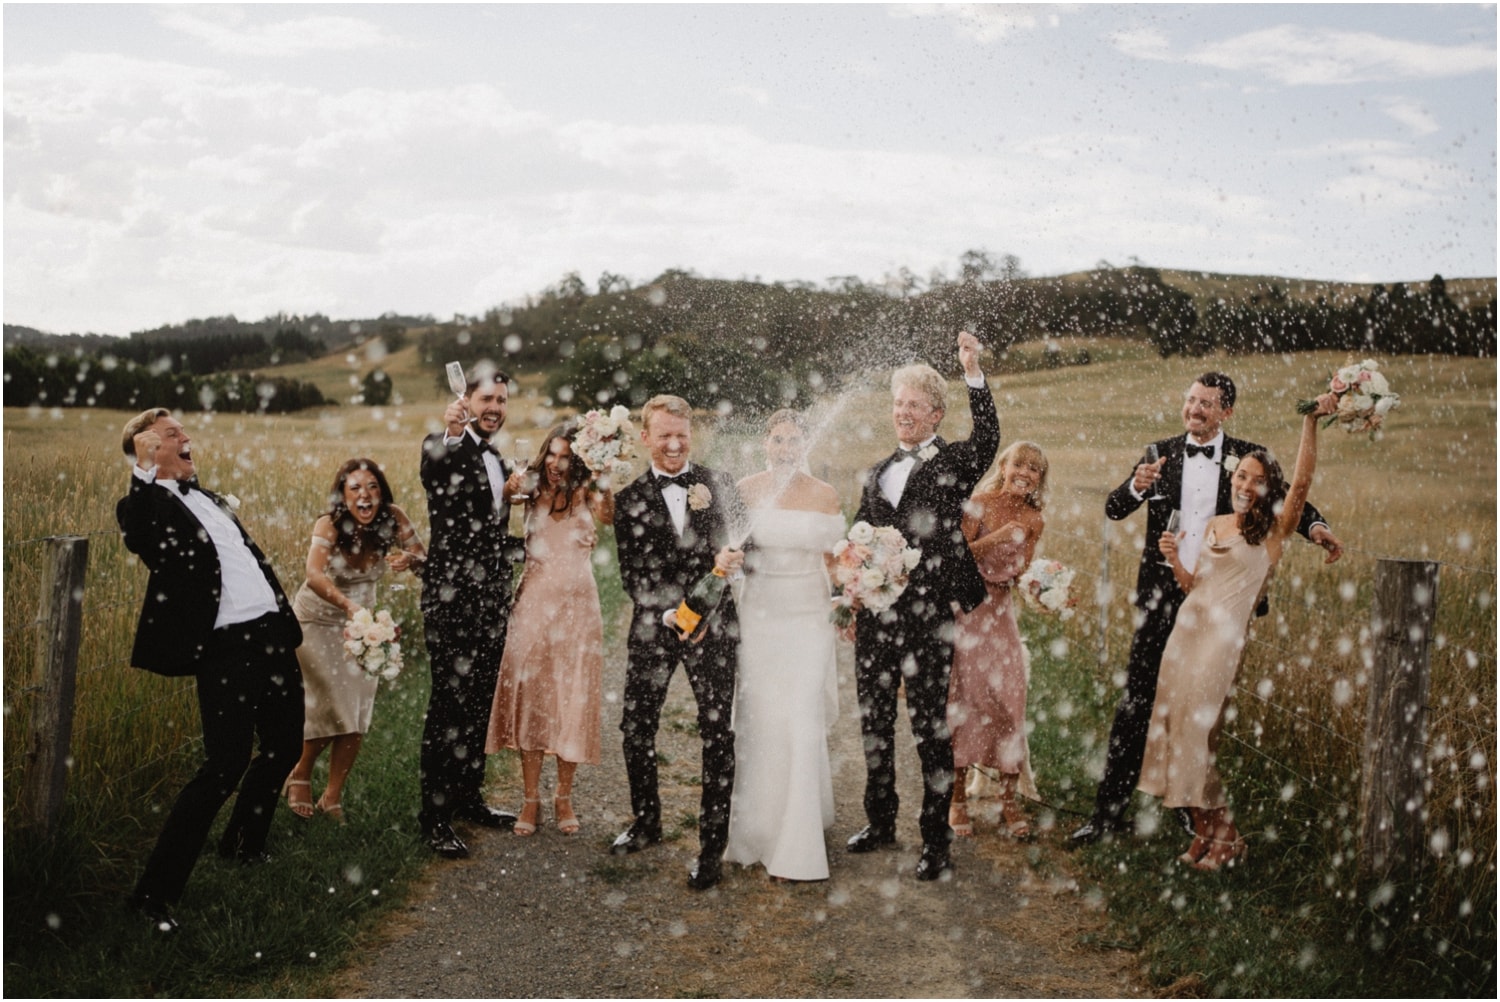 A newly married couple spray champagne at their Bendooley Estate Stables wedding